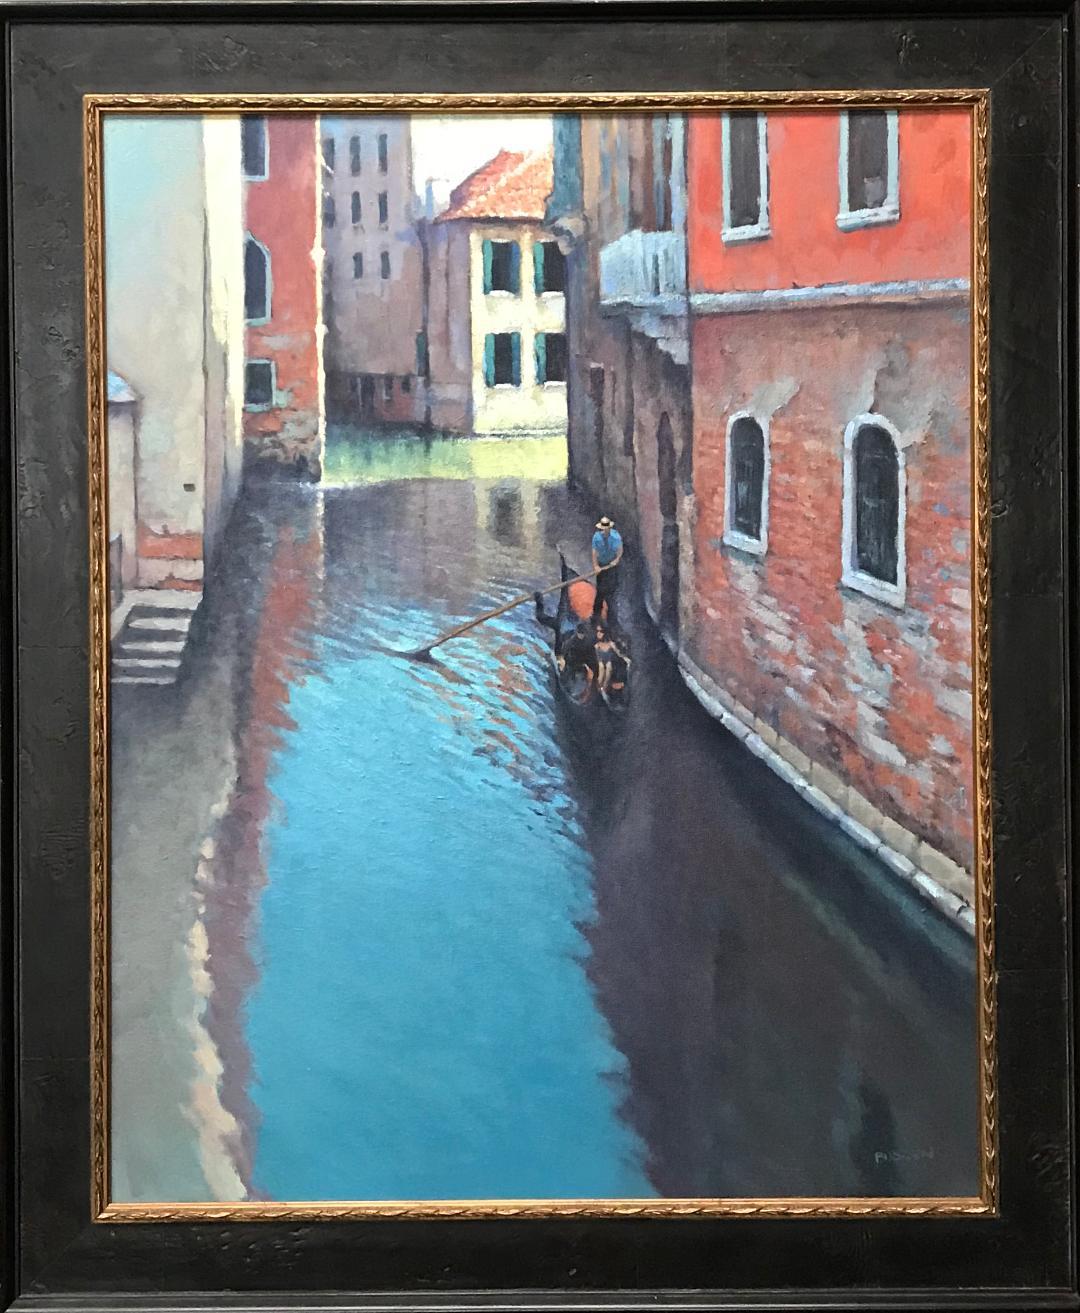 Reflections Of Venice is an oil painting on canvas by award winning contemporary artist Michael Budden that showcases a romantic canal ride for a couple created in an impressionistic realism style. The painting exudes the very rich qualities of